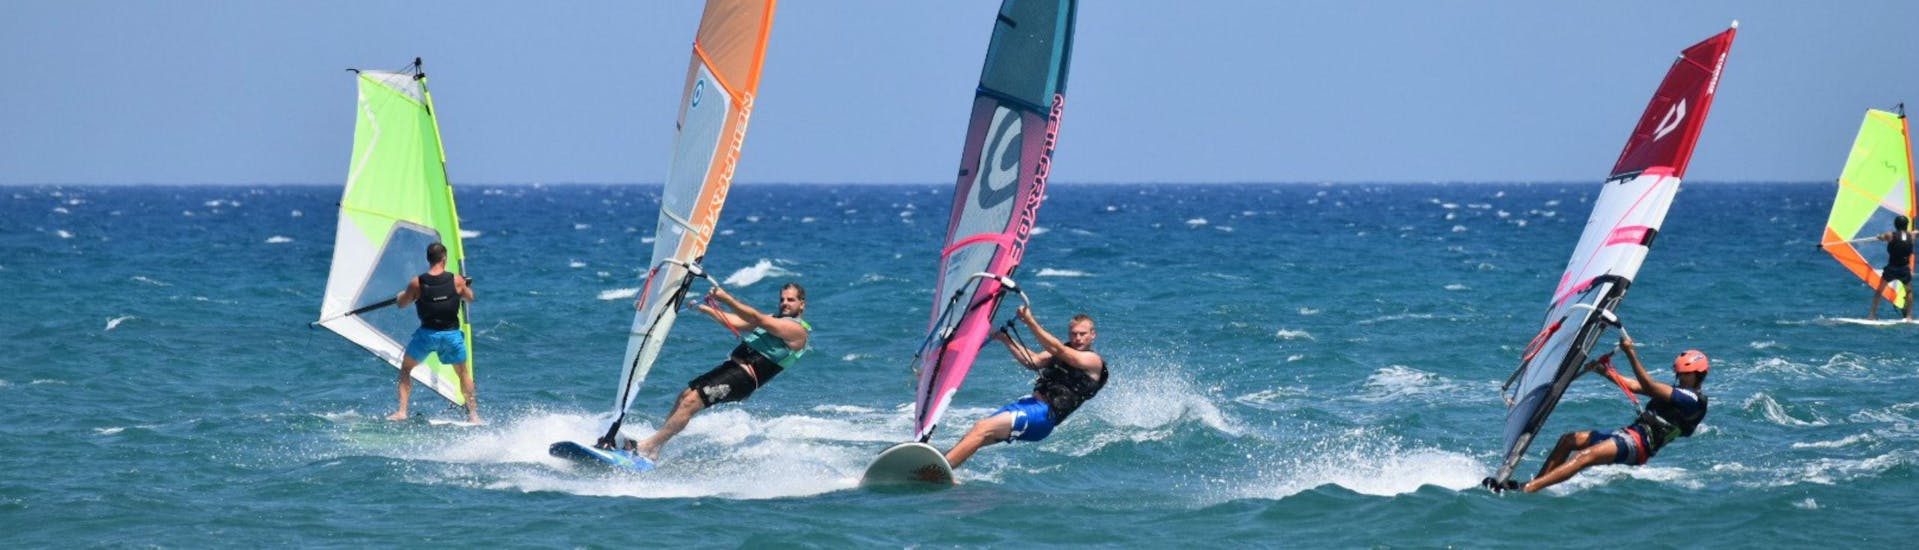 Group Windsurfing Lessons for Adults for Advanced Surfers.